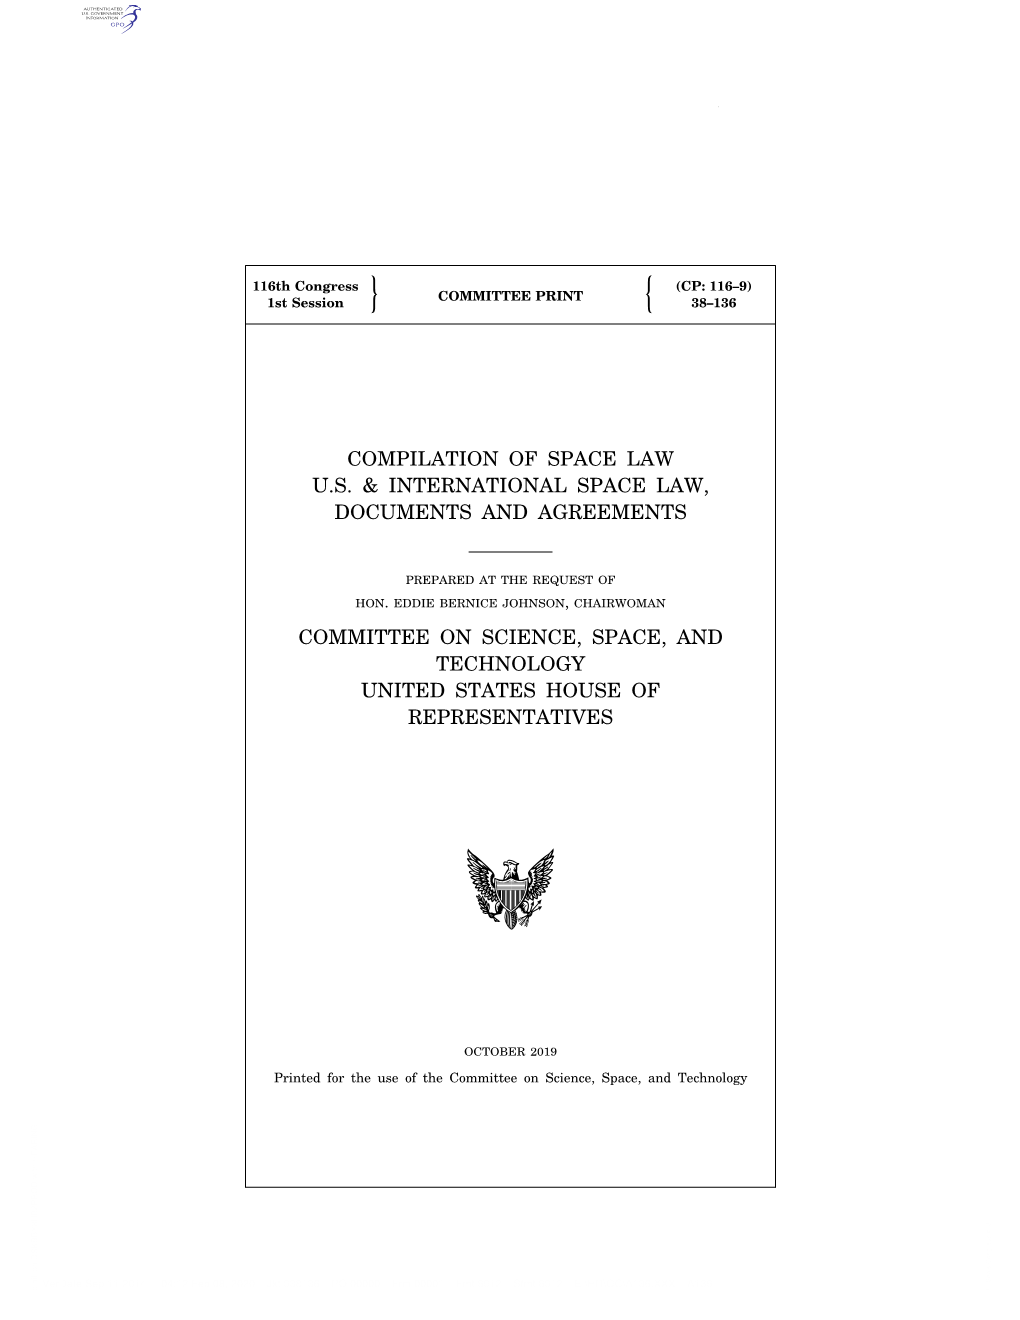 International Space Law, Documents and Agreements